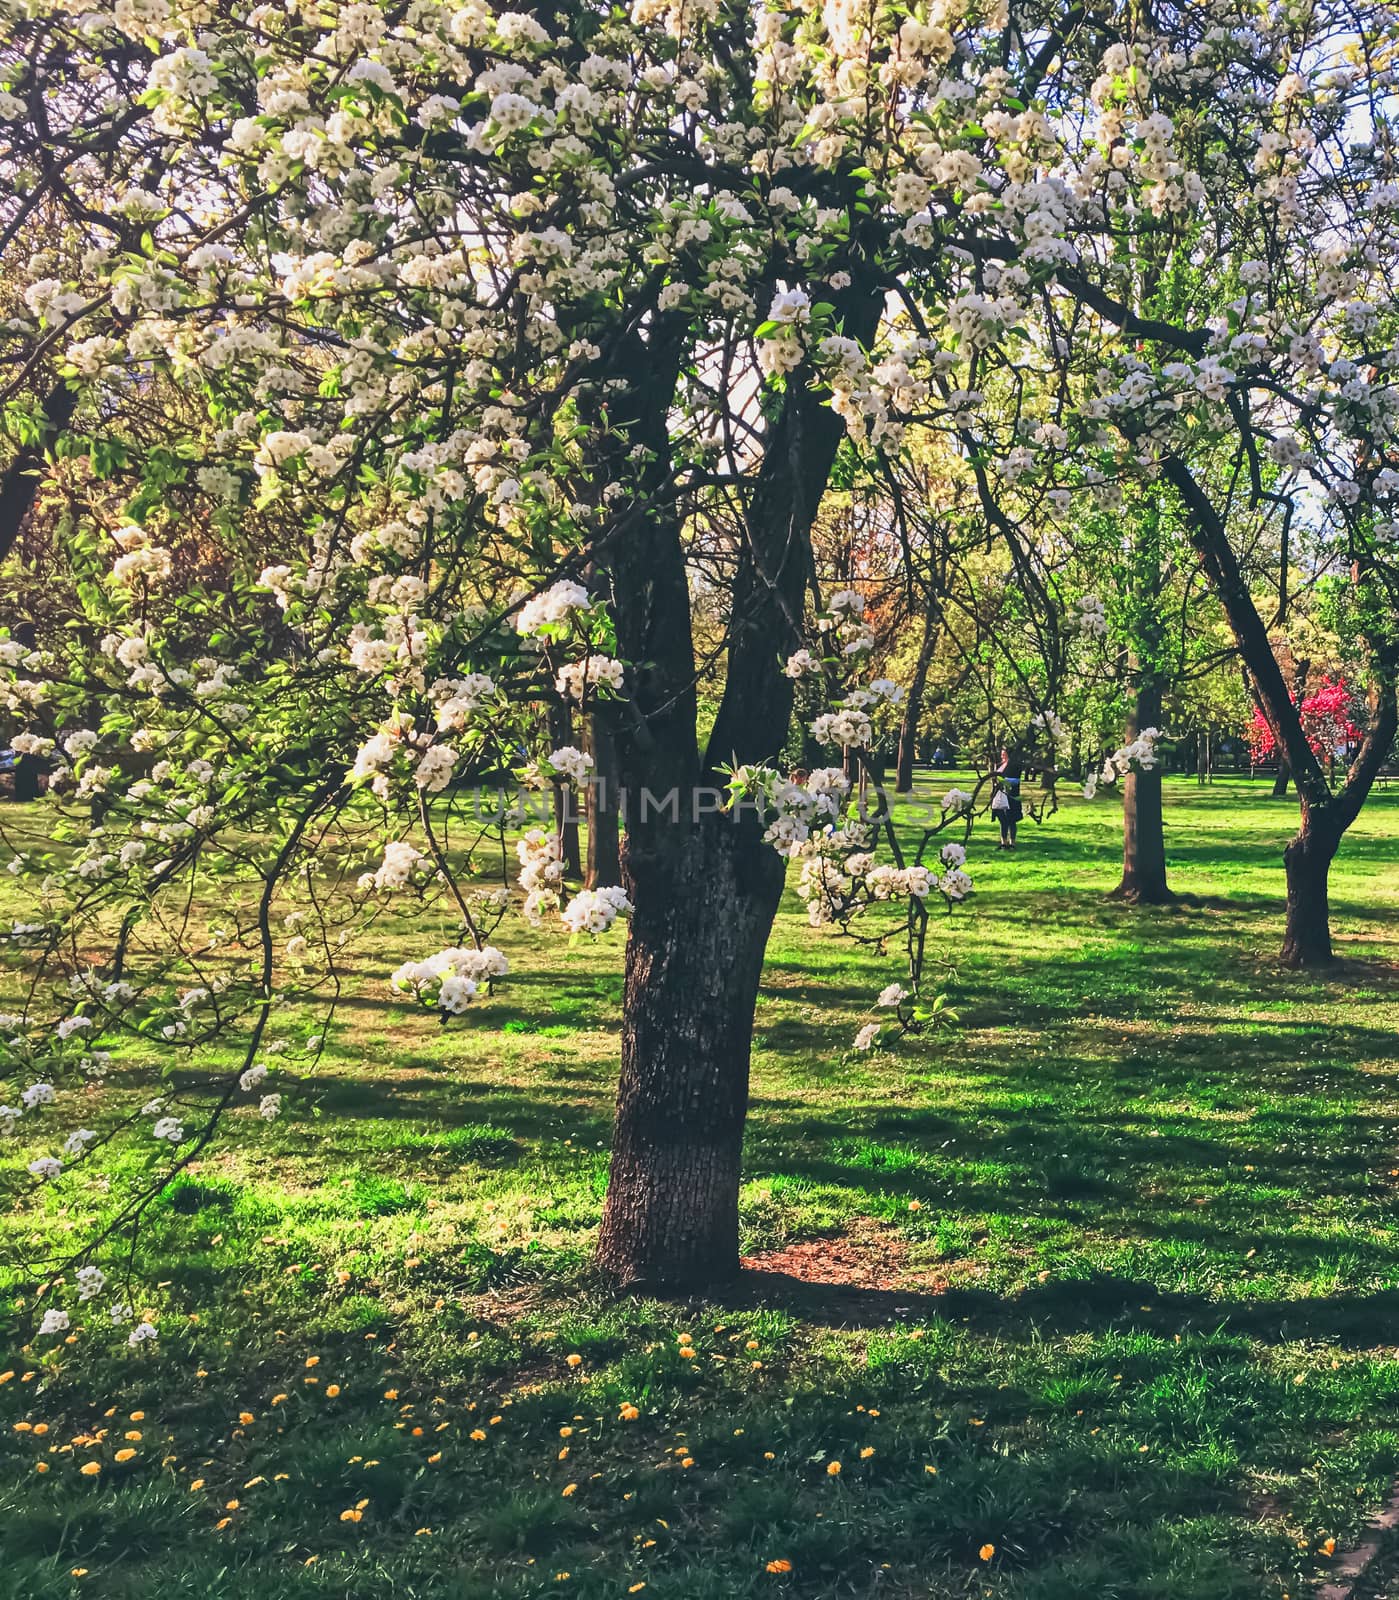 Blooming trees in spring in a city park by Anneleven